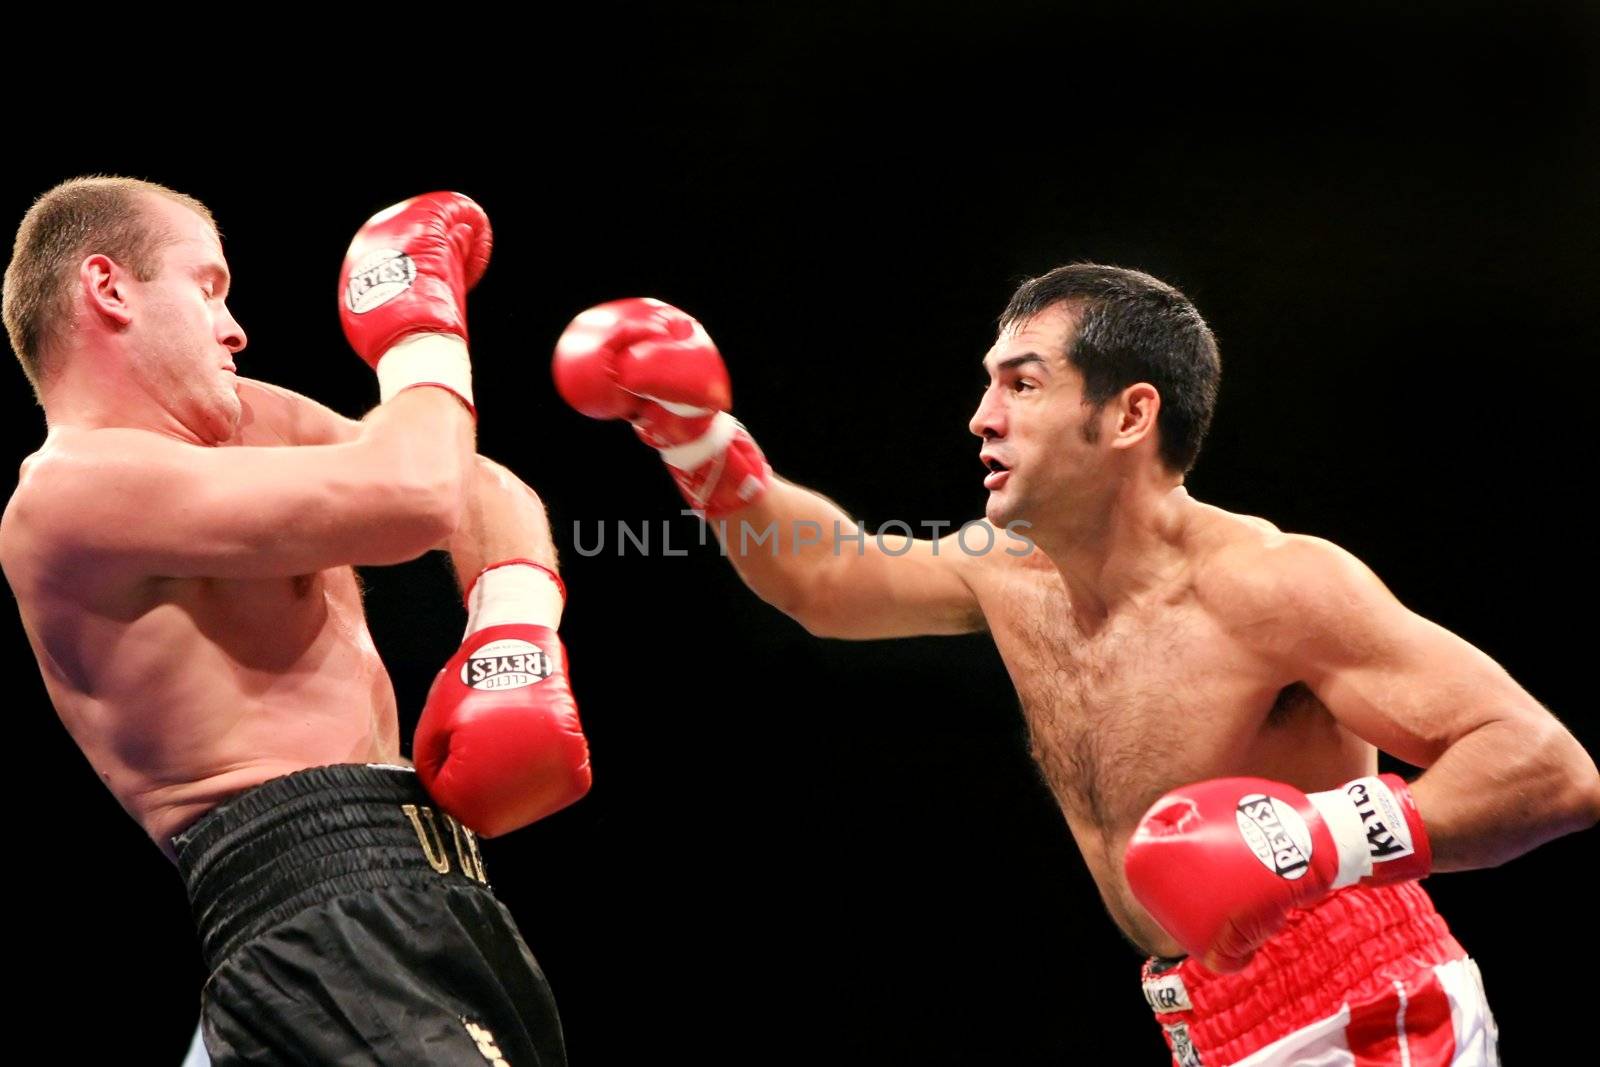  Argentinean Julio Cesar Dominguez (18-4-1, 12 KOs) is on the attack against defending WBA #8 light heavyweighter Vyacheslav Uzelkov (18-0, 11 KOs)  during their bout for the WBA light heavyweight Intercontinental Champion title at the Sports Palace Thursday, Feb 21, 2008 in Kyiv.